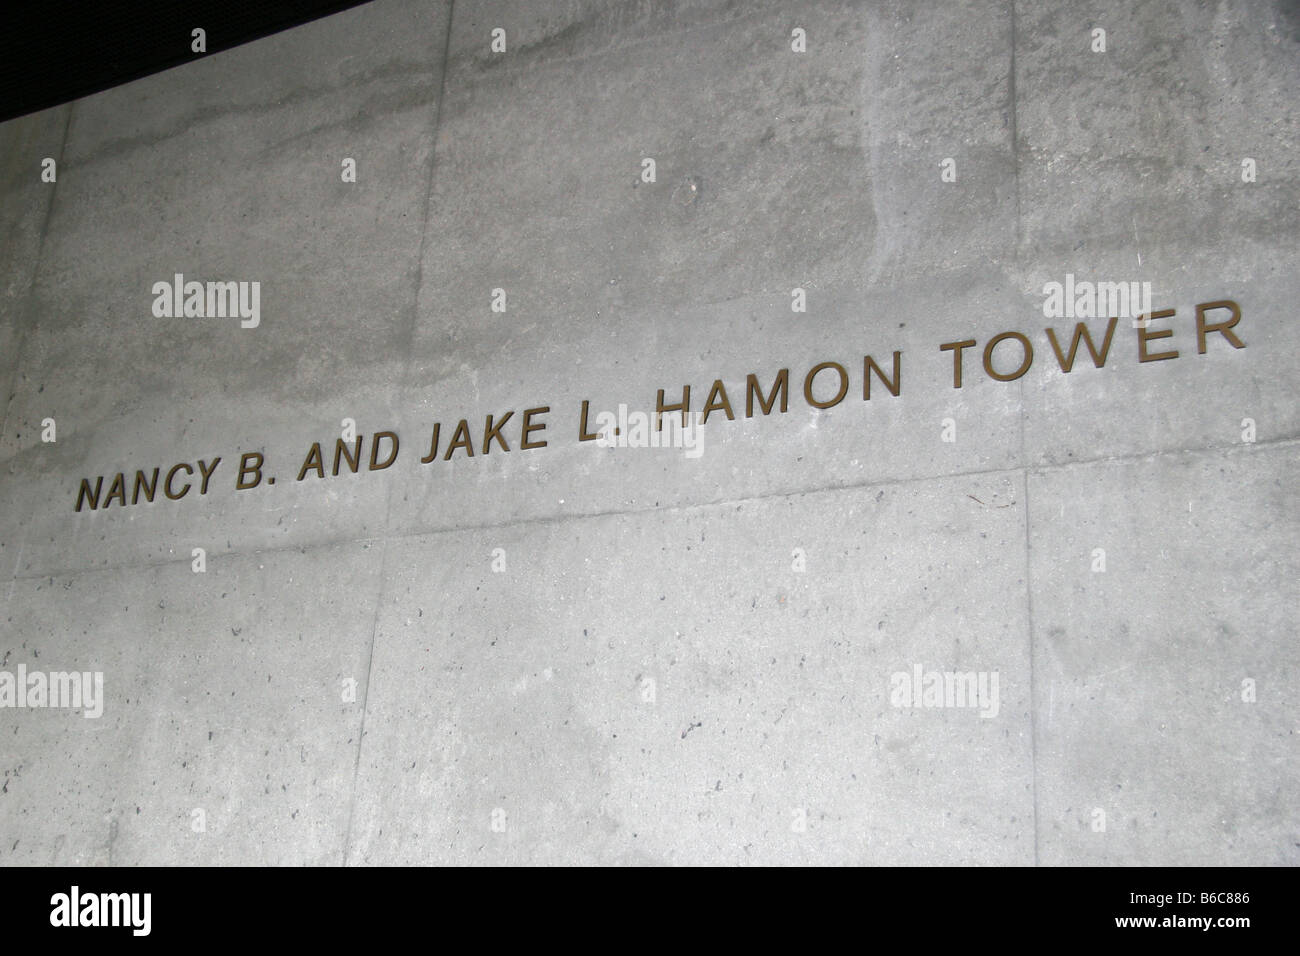 Sign for the Nancy B. and Jake L. Hamon Tower at the M.H. de Young Memorial Museum, San Francisco, California. Stock Photo